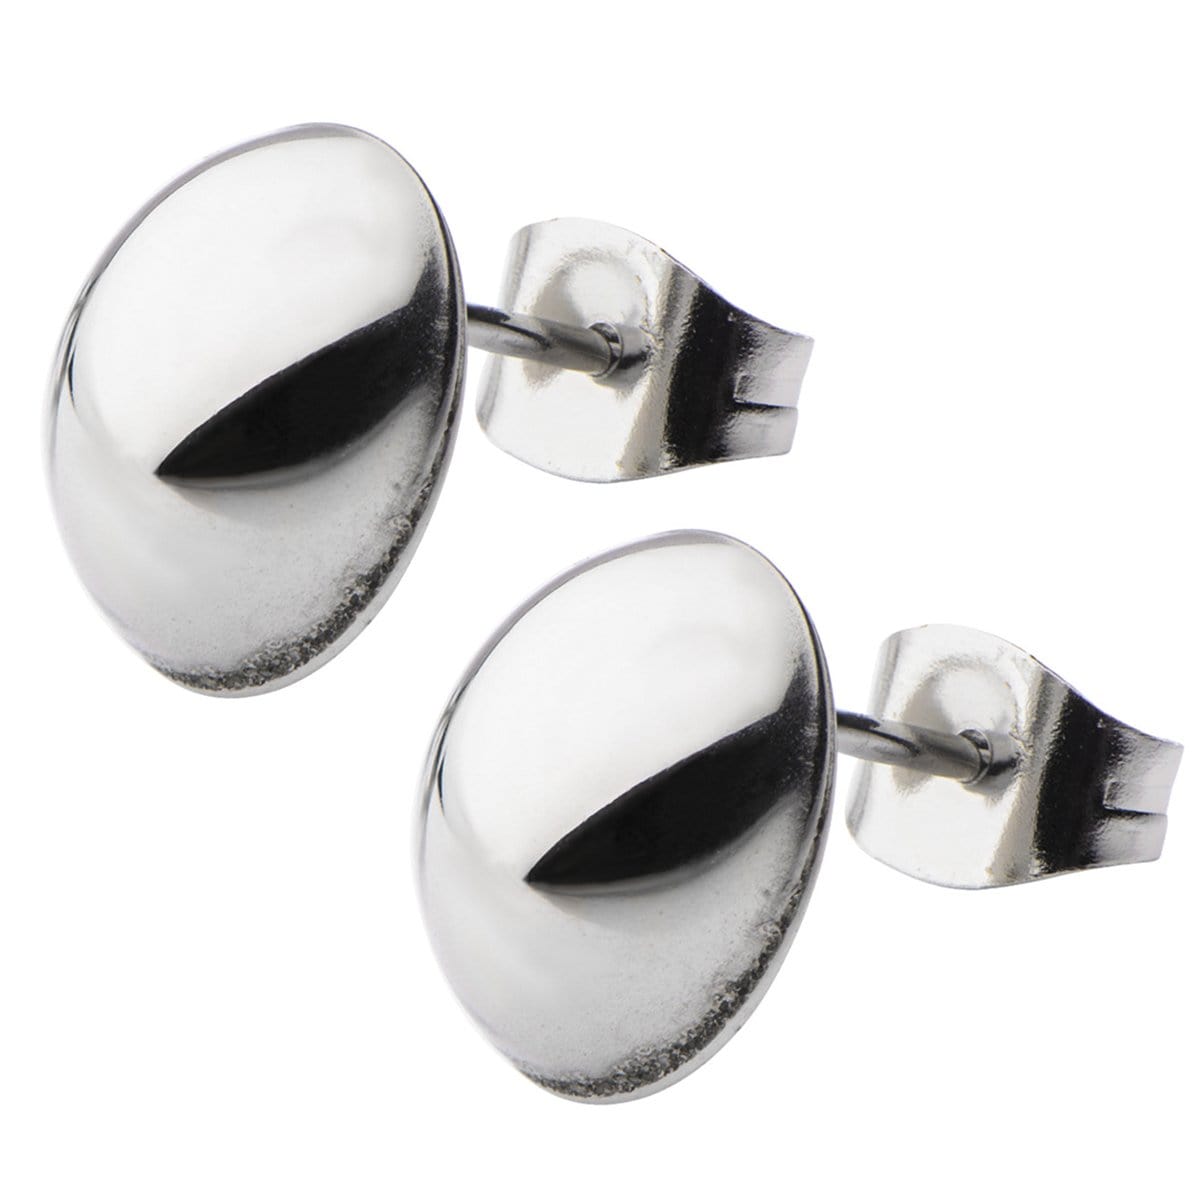 INOX JEWELRY Earrings Silver Tone Stainless Steel Small Oval Dome Studs SSE4808